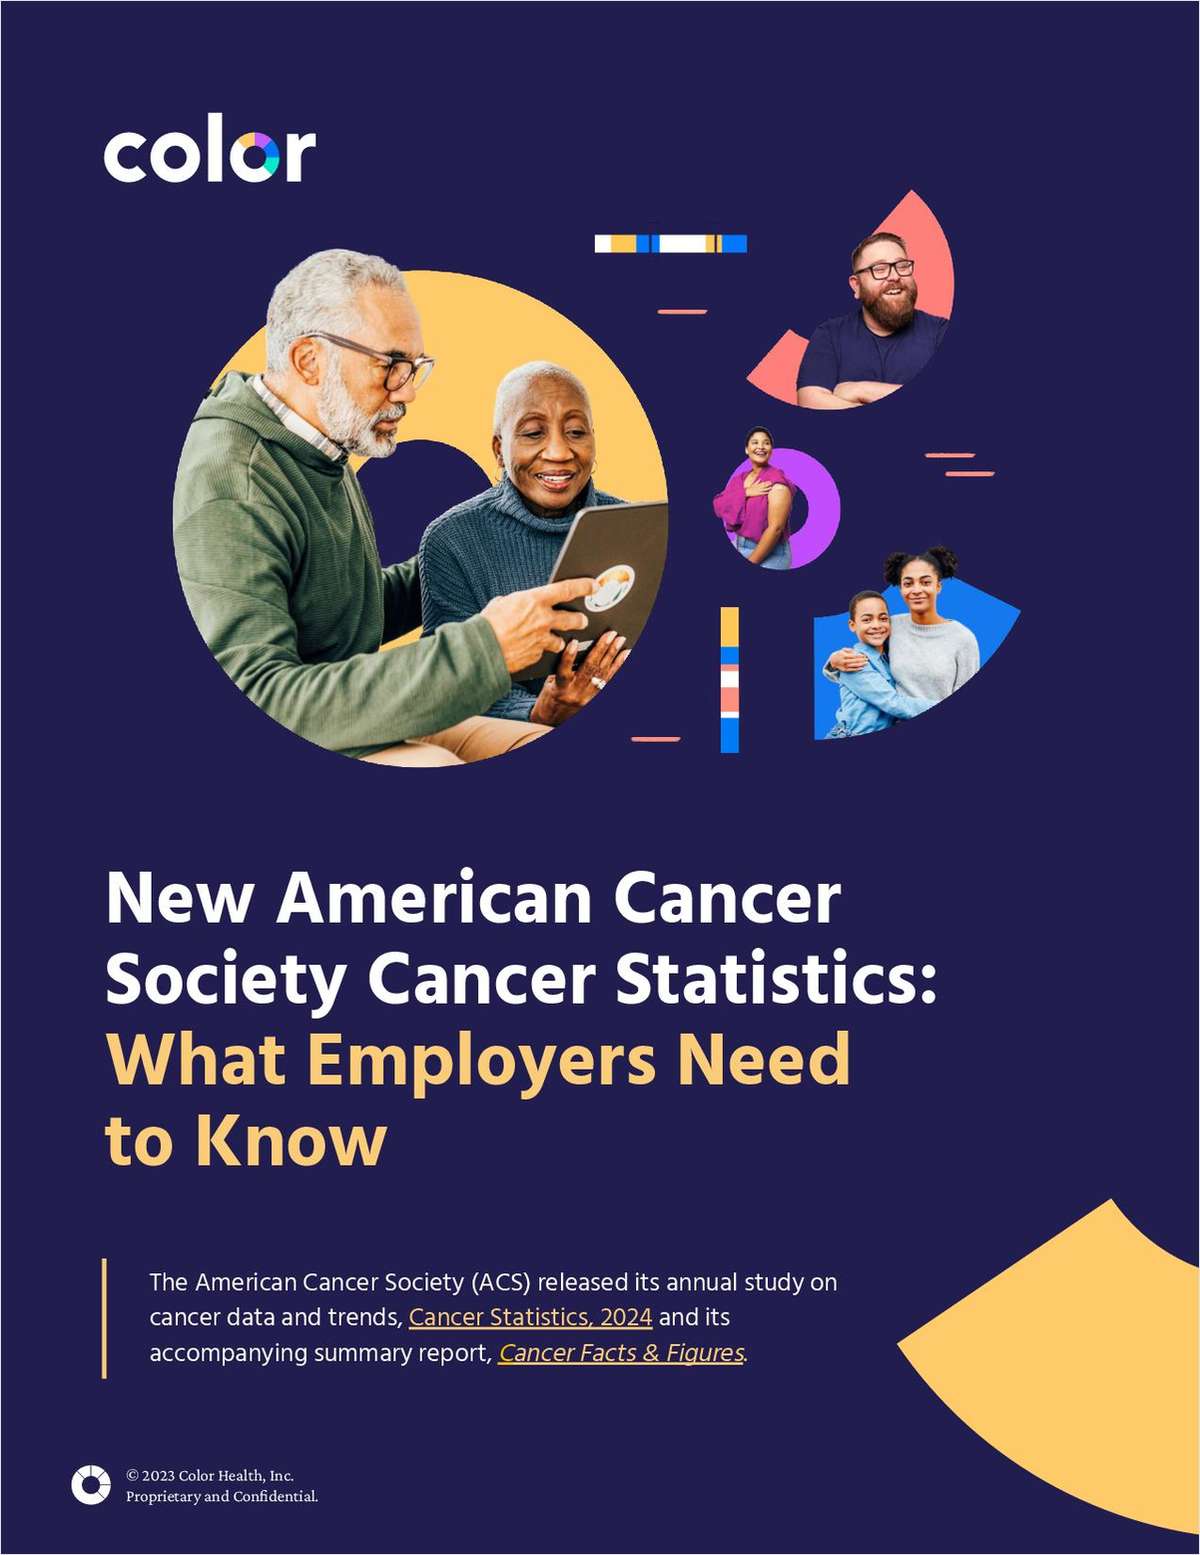 New American Cancer Society Cancer Statistics: What Employers Need to Know link